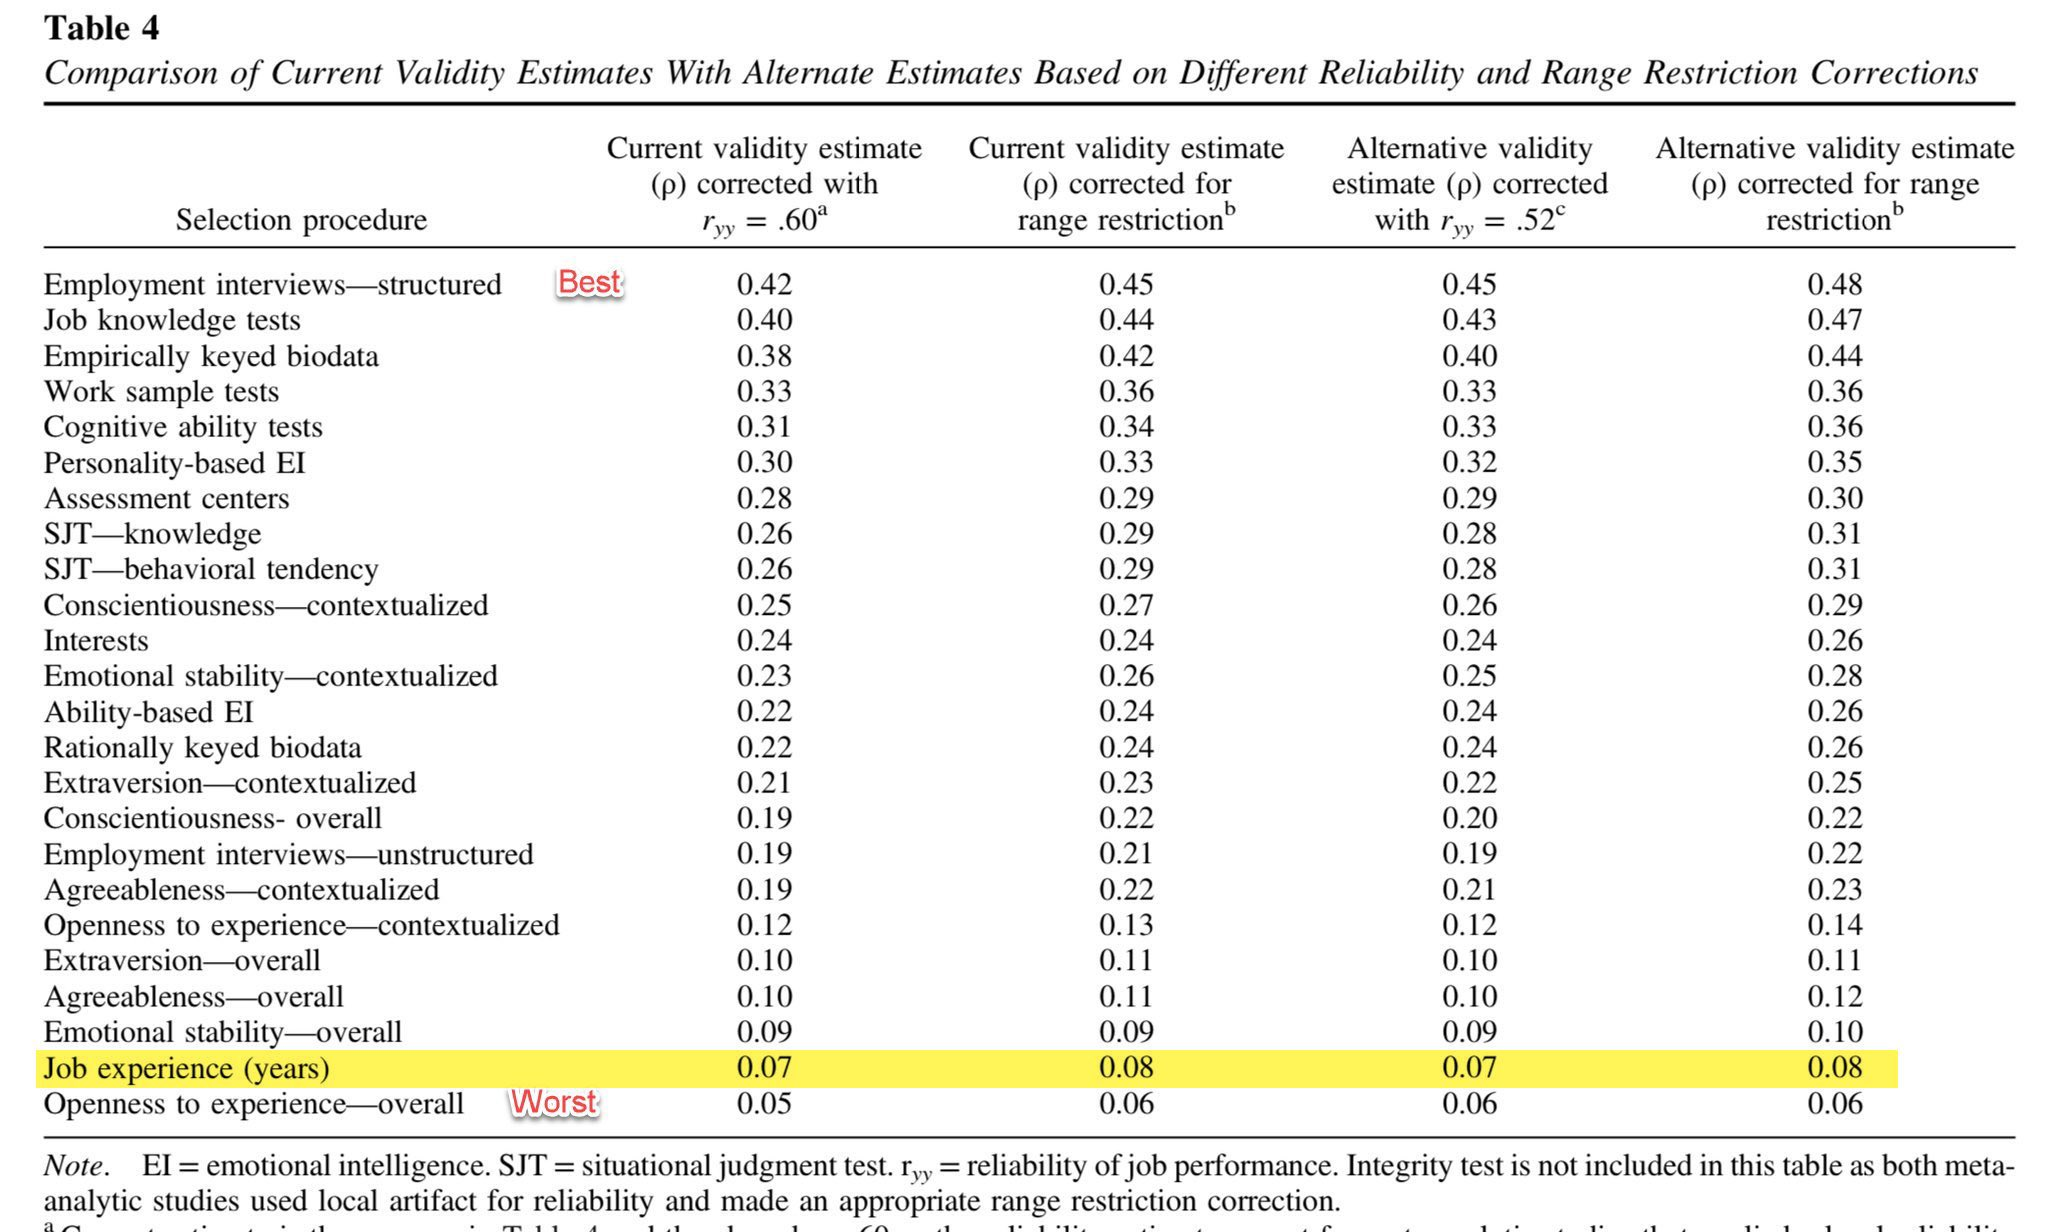 Table 4 from Sacket et al, listing the selection procedure’s validity estimate under a variety of measures.